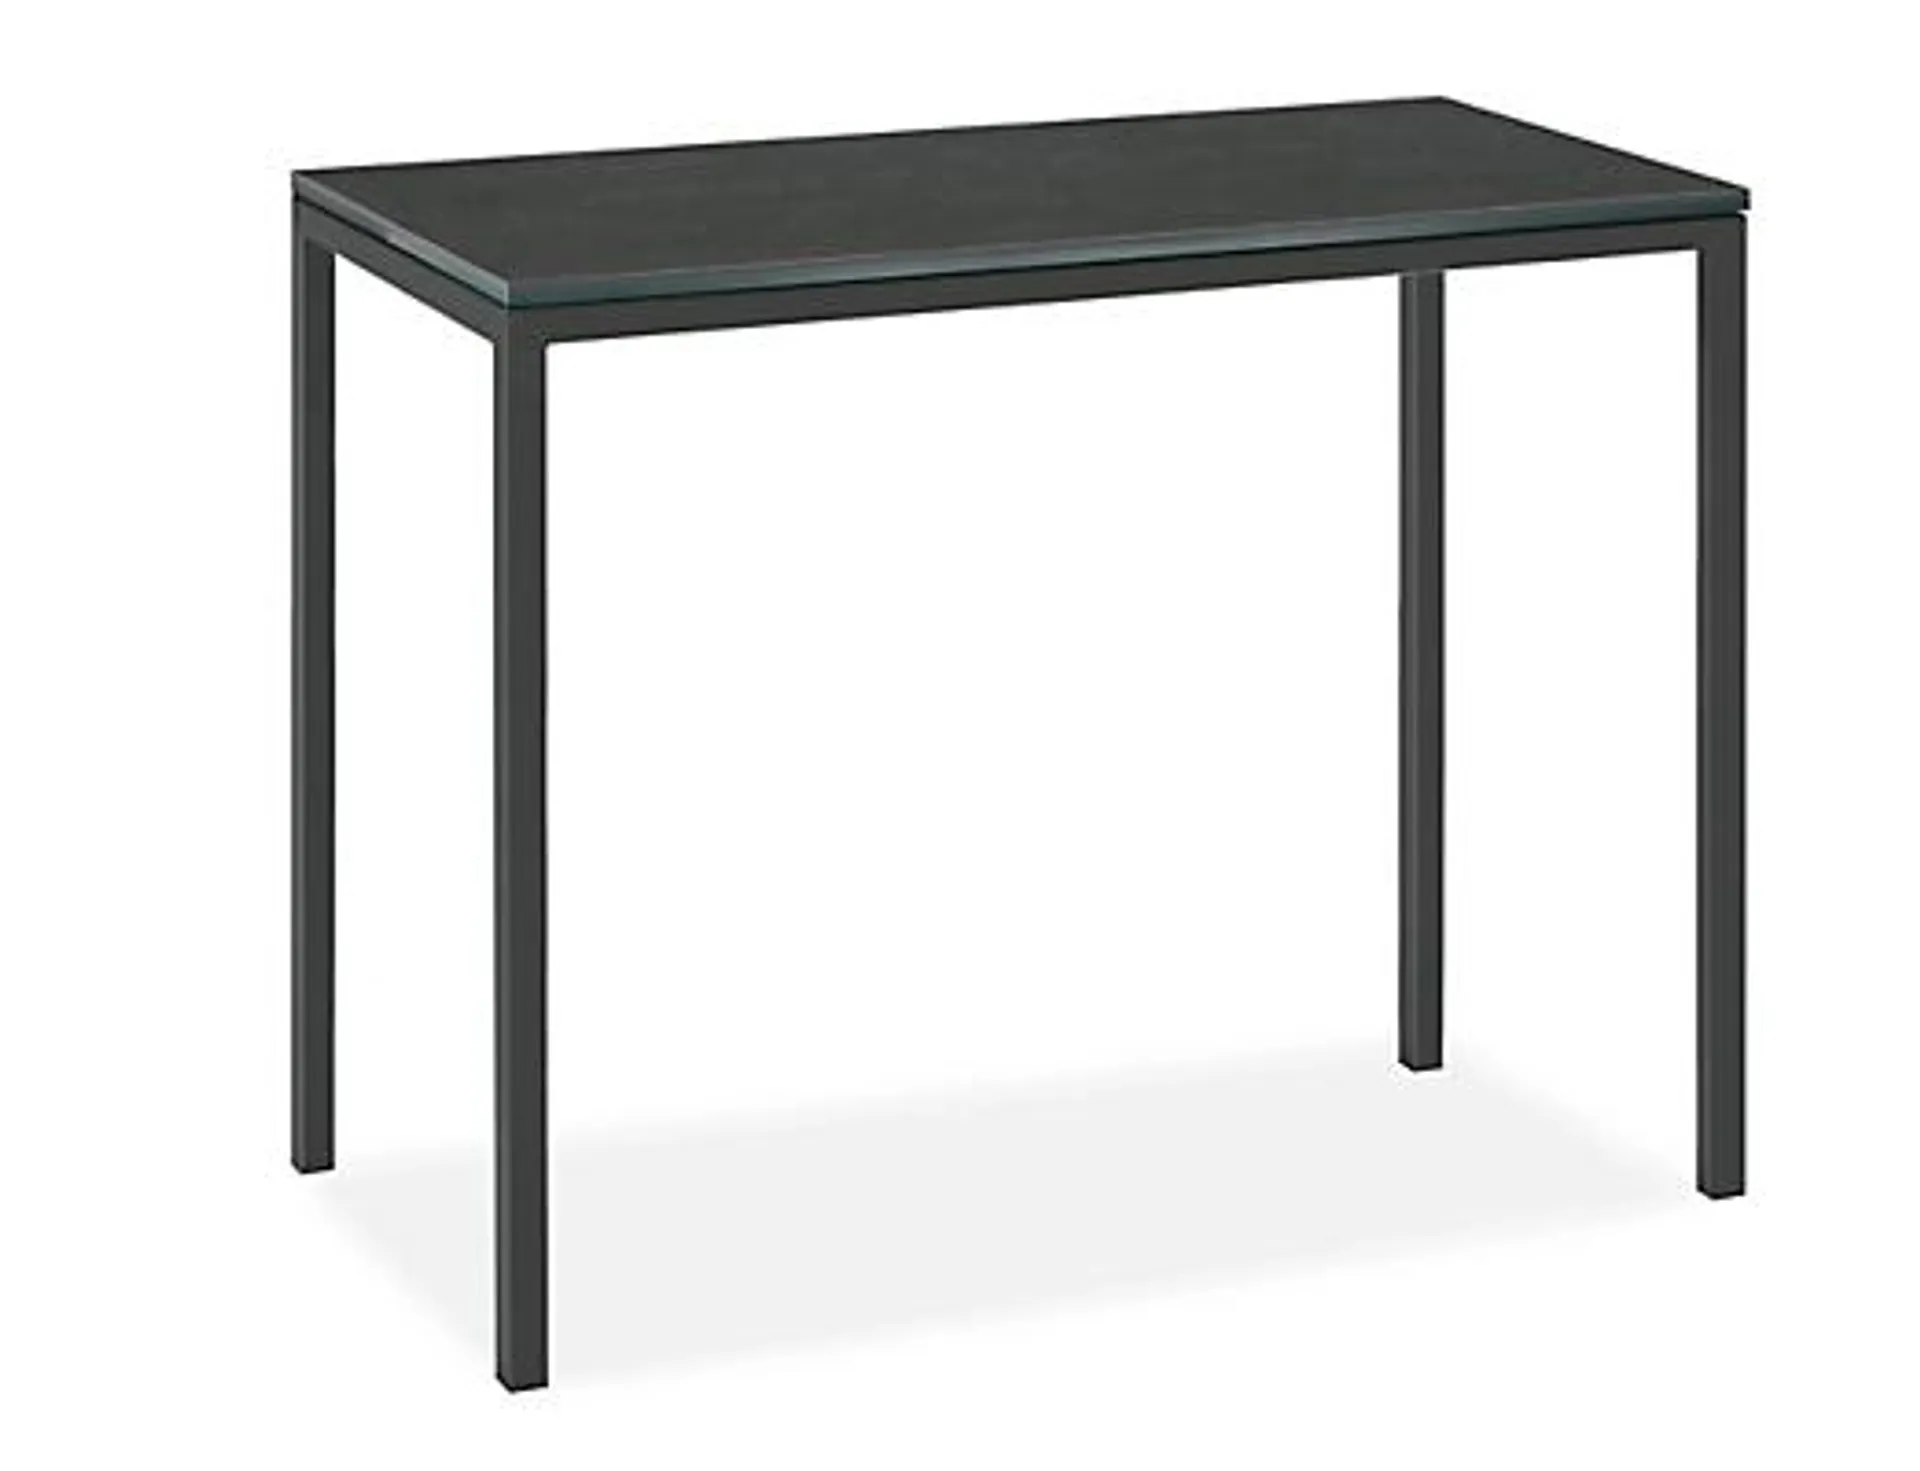 Parsons 36w 16d 22h 1" End Table in Graphite with Marbled Grey Ceramic Top